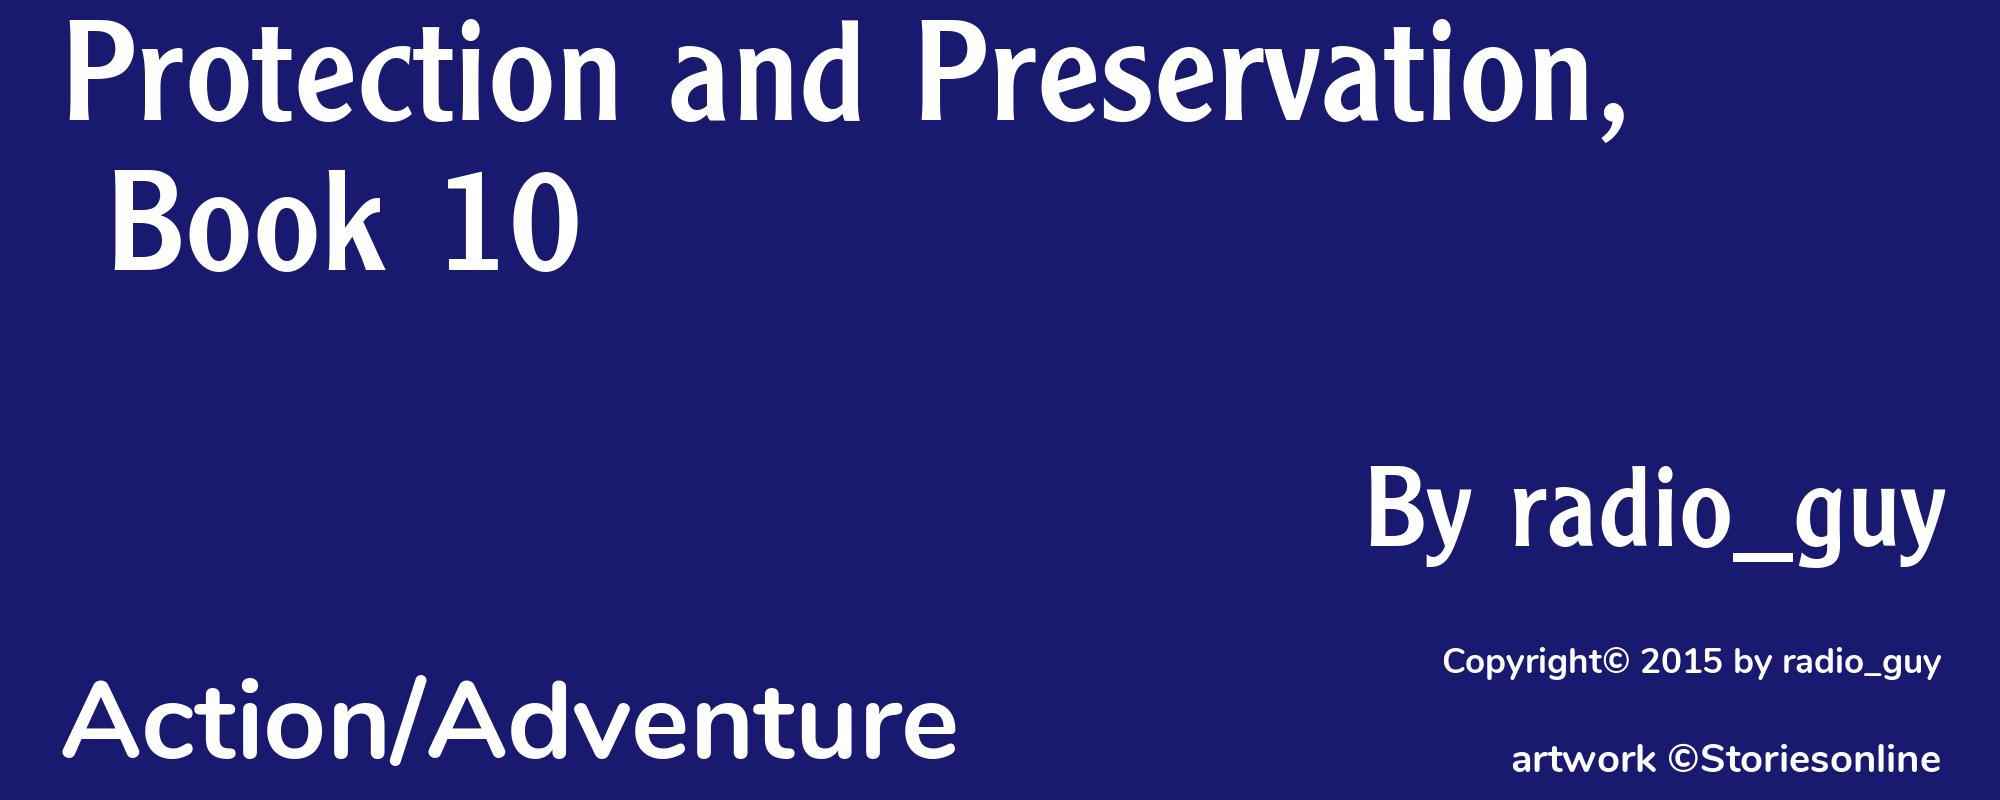 Protection and Preservation, Book 10 - Cover